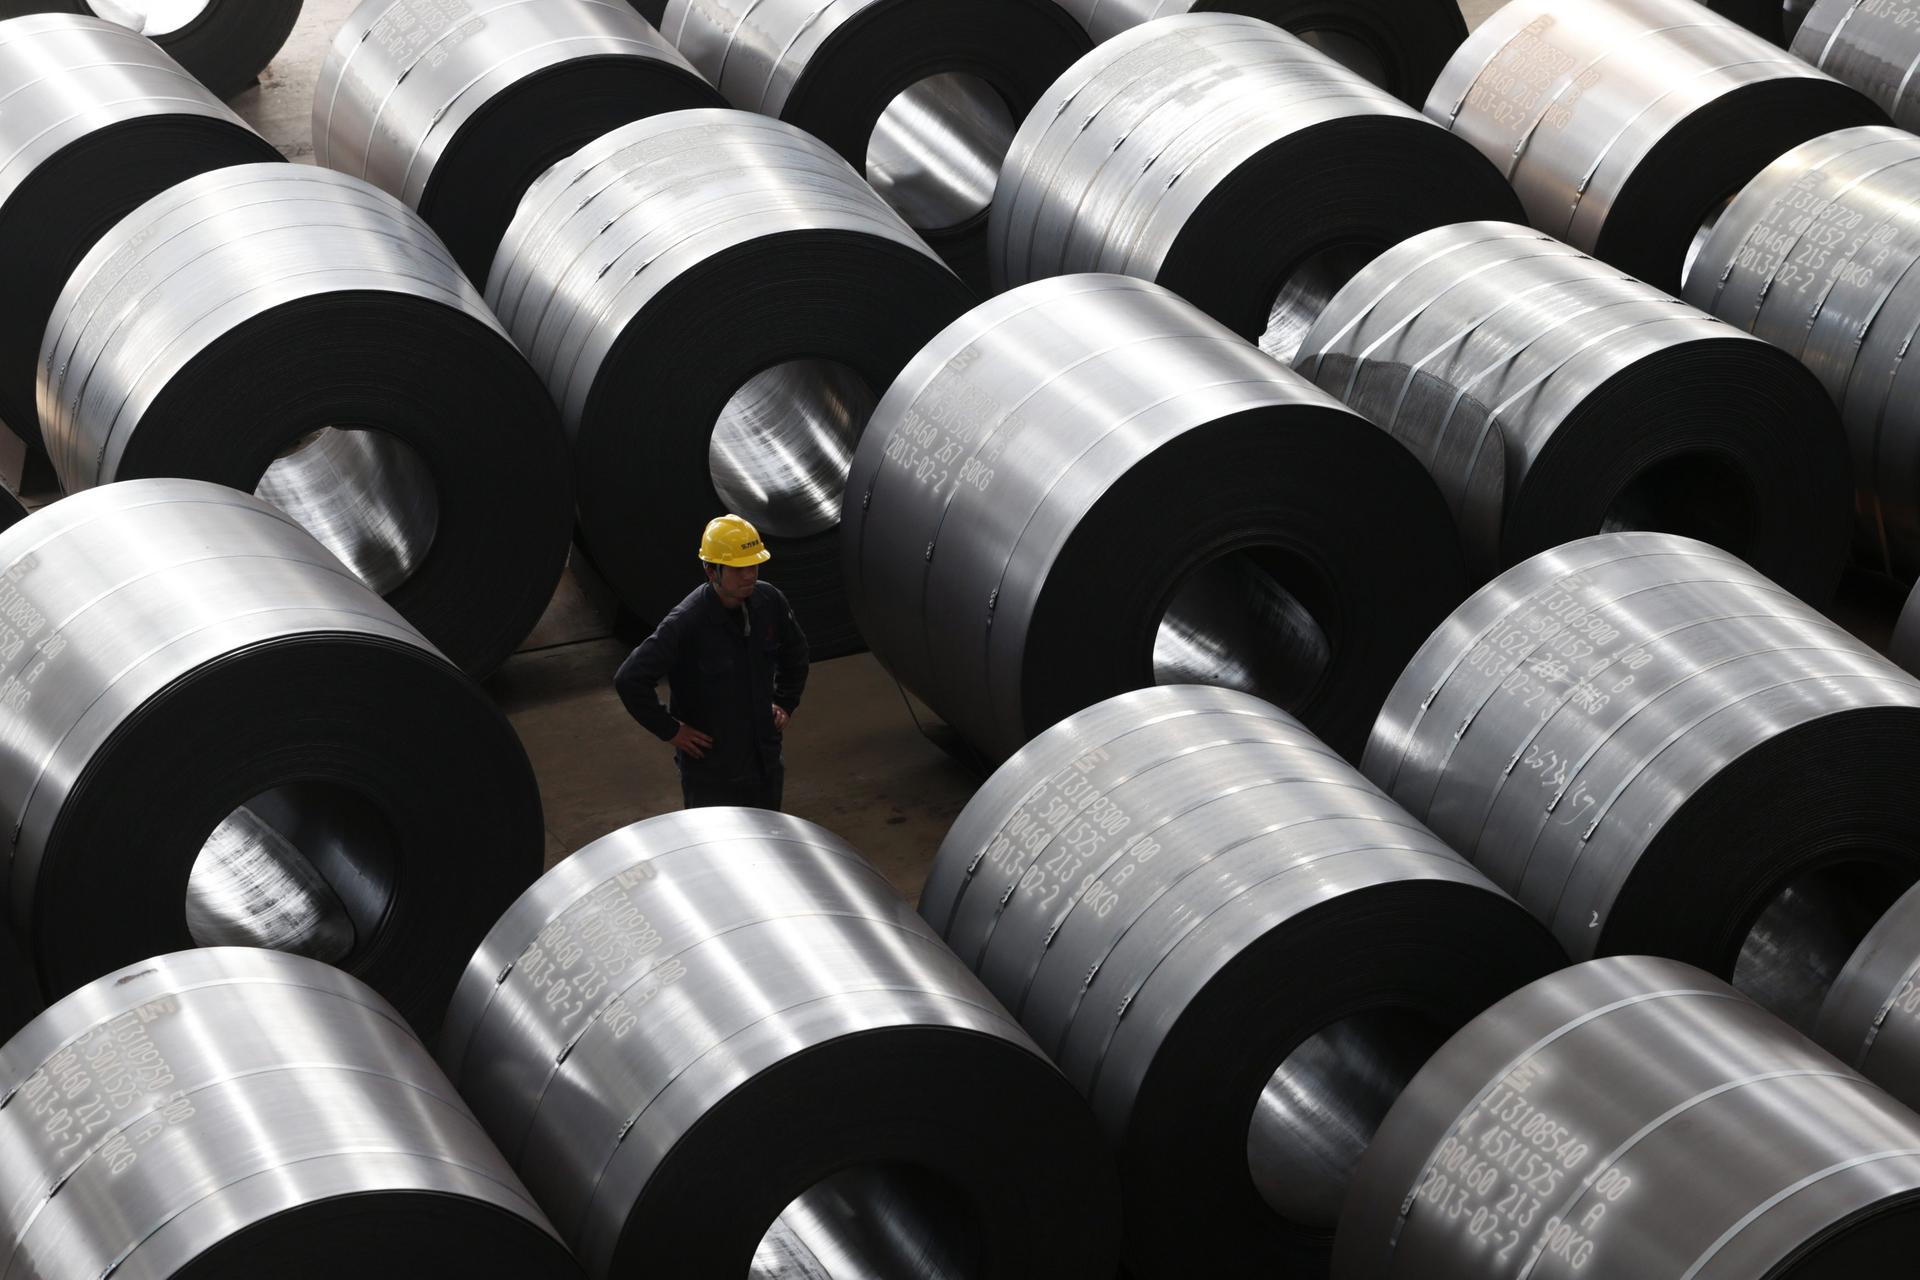 From January to November 2014 China exported 83.6 million tonnes of steel products, up 46.8 per cent from a year earlier. Photo: Reuters